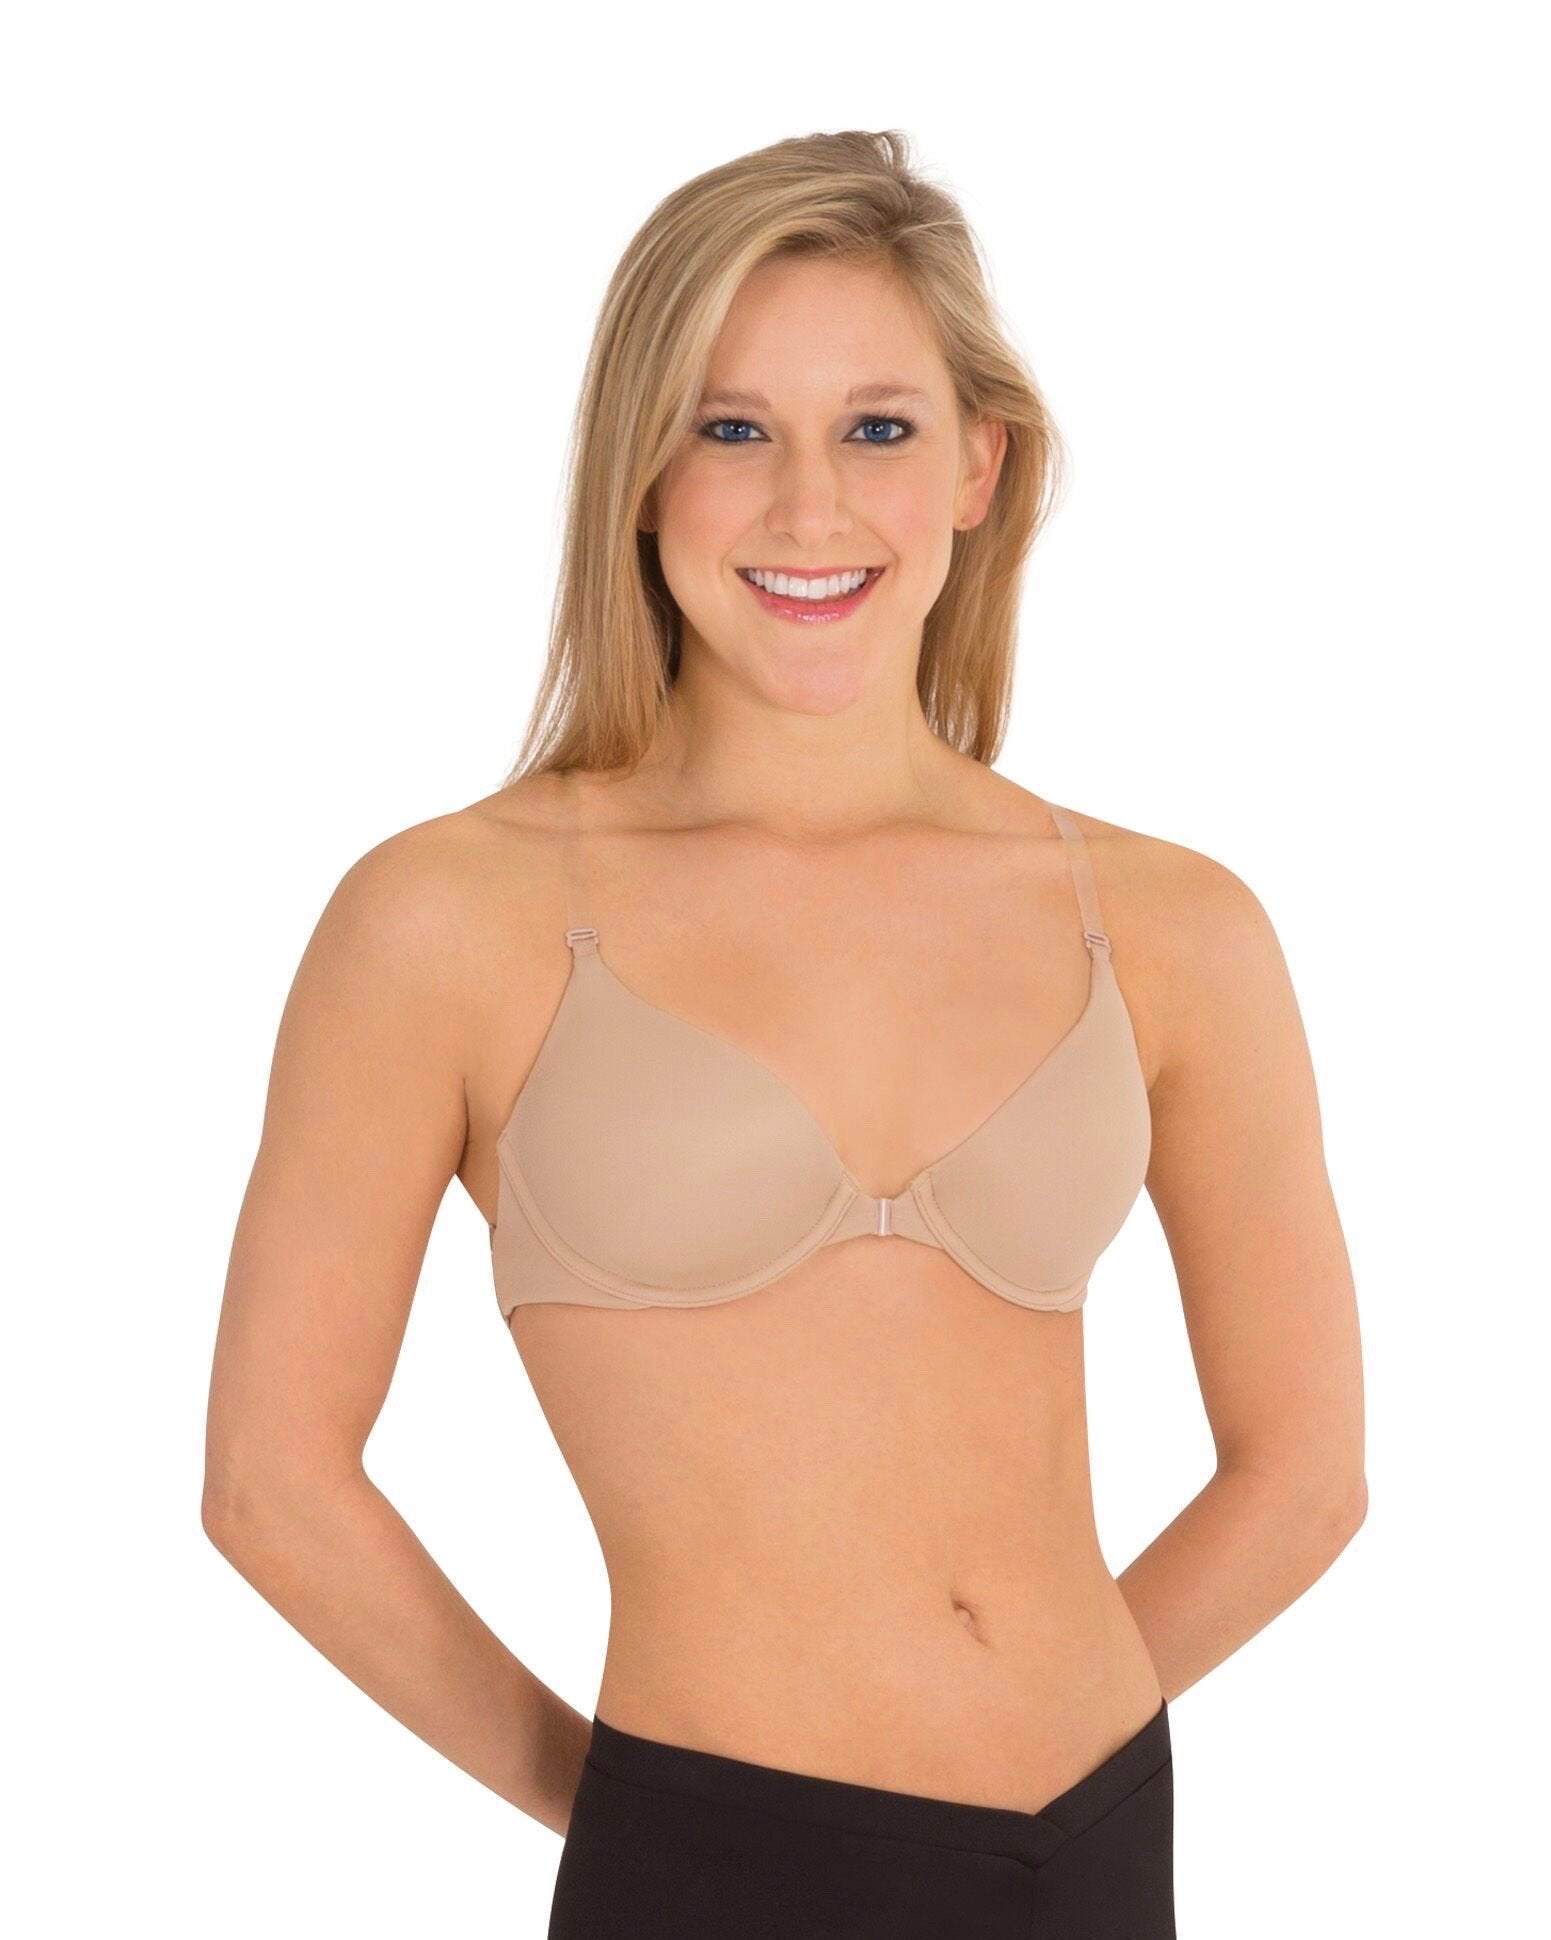 Eashery Under Outfit Bras for Women Women's Seamless Underwire Strapless  Convertible Bralette Bra with Invisible Straps Bra Brassiere Khaki Medium